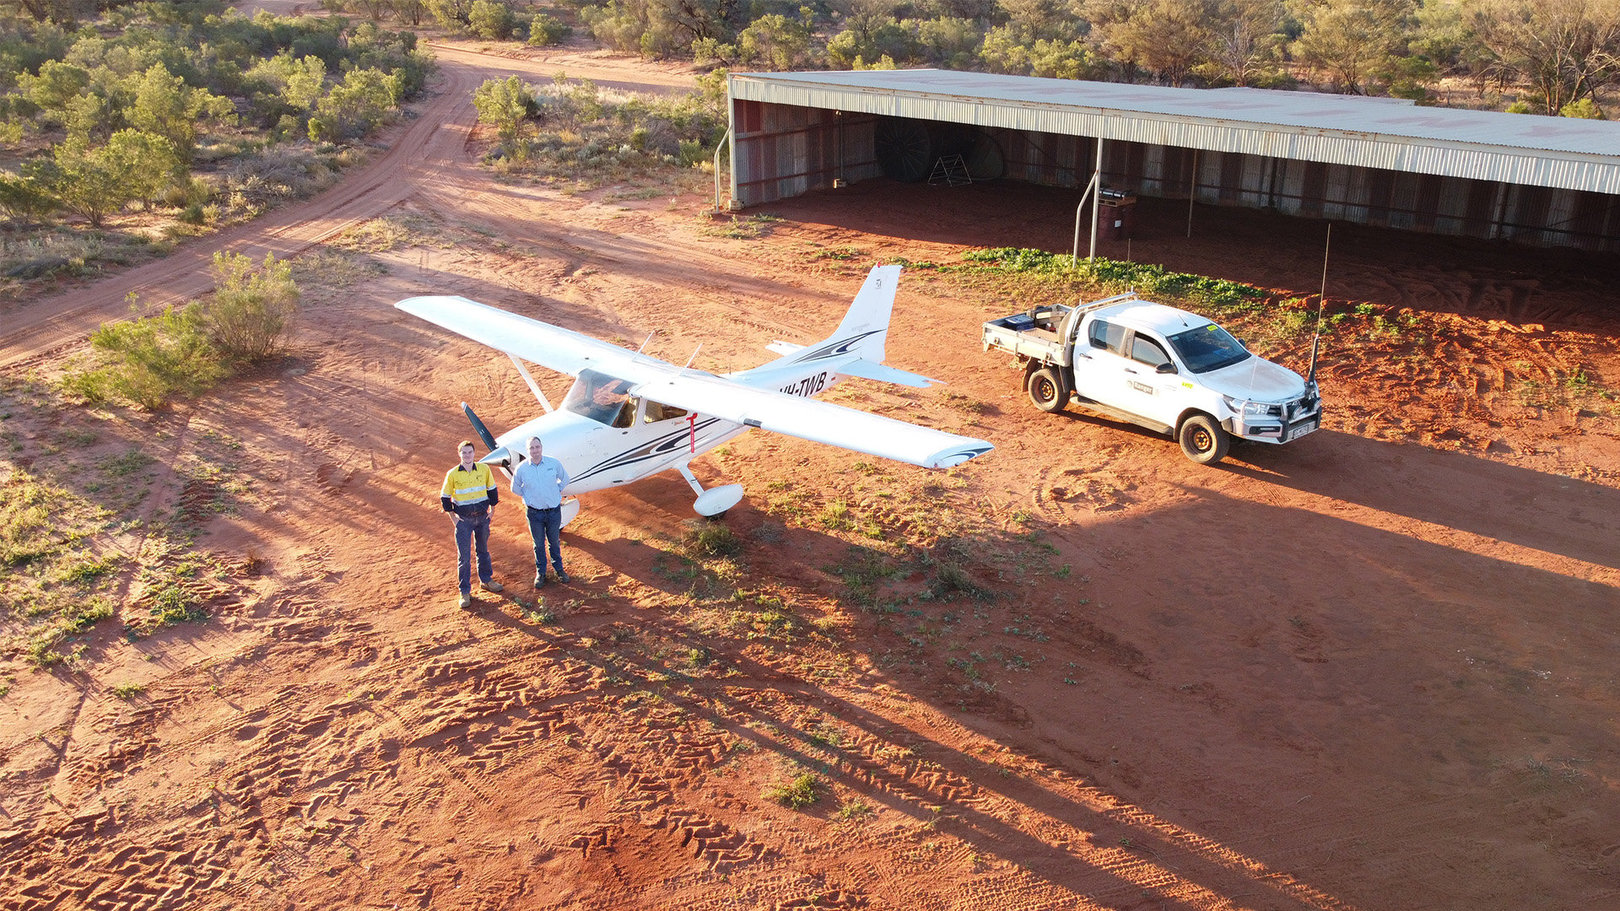 Two men stand next to a small plane on a dirt runway. To the right behind them is a ute and a large empty shed,